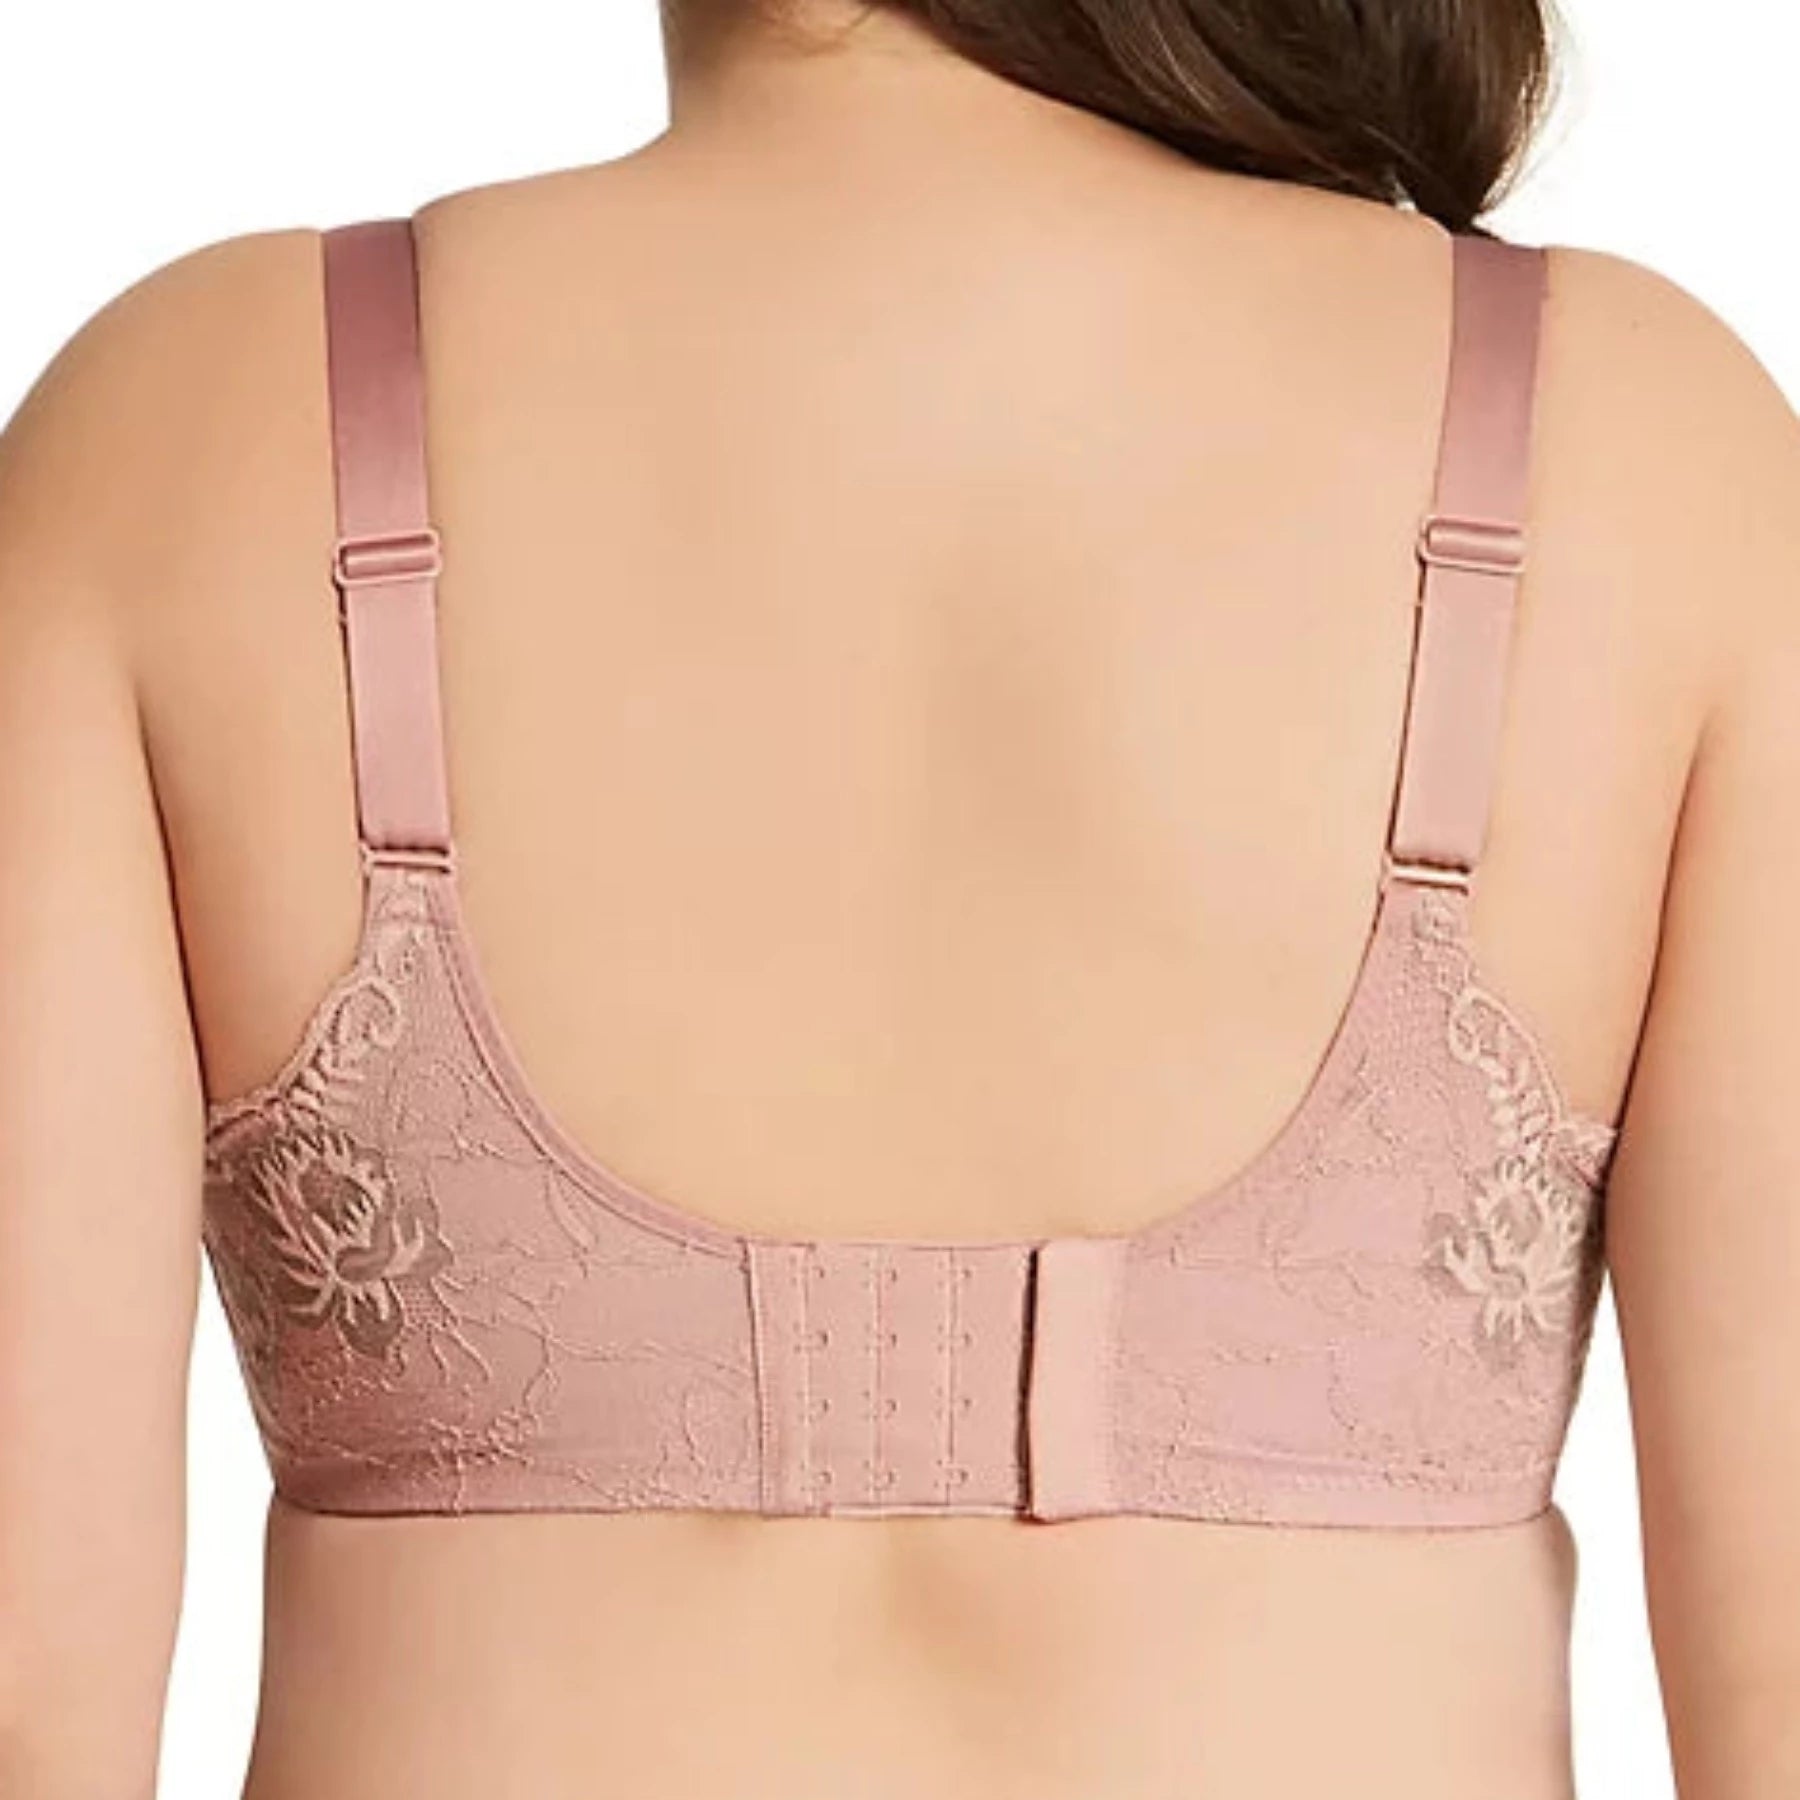 Microfiber & Lace Molded Underwire 2911 - Dusty Rose